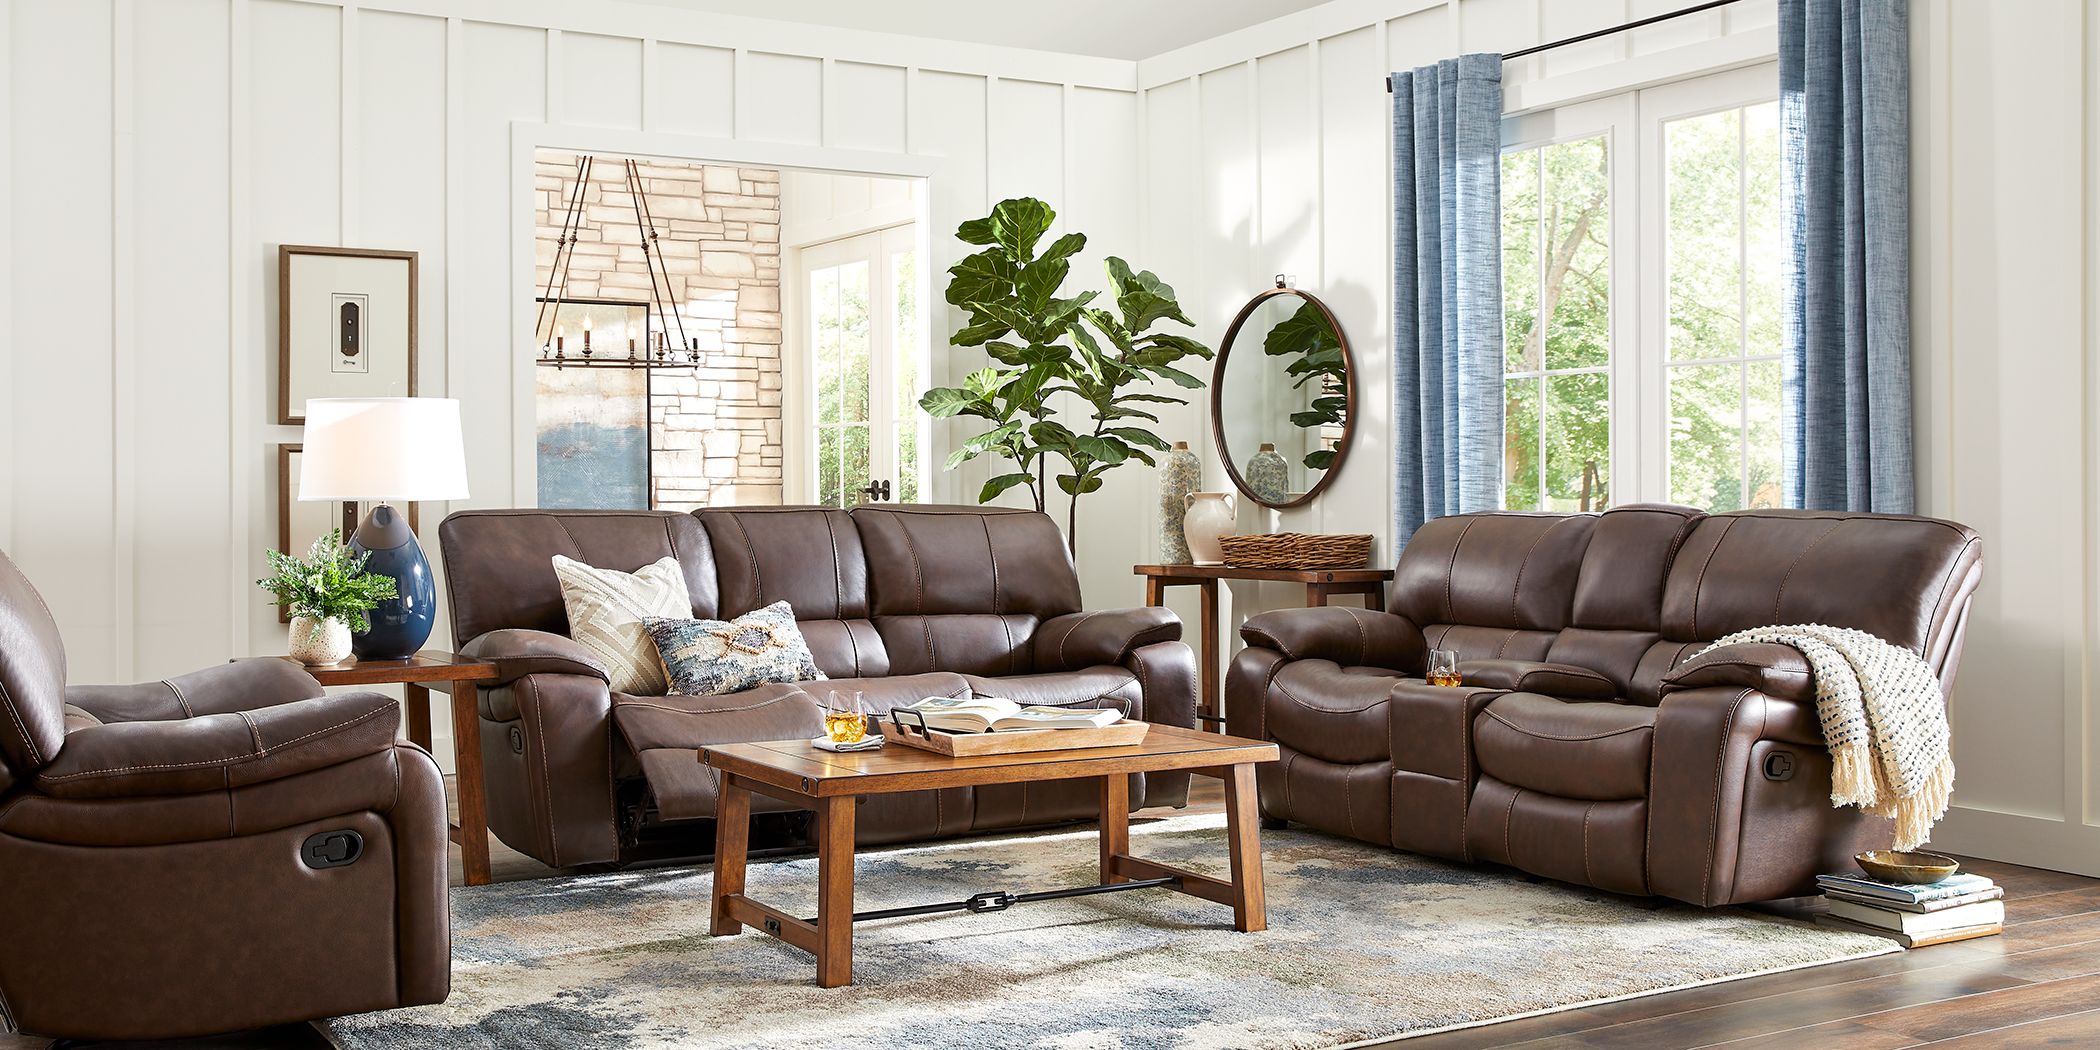 Cindy Crawford Home Leather Furniture, Rooms To Go Leather Couches